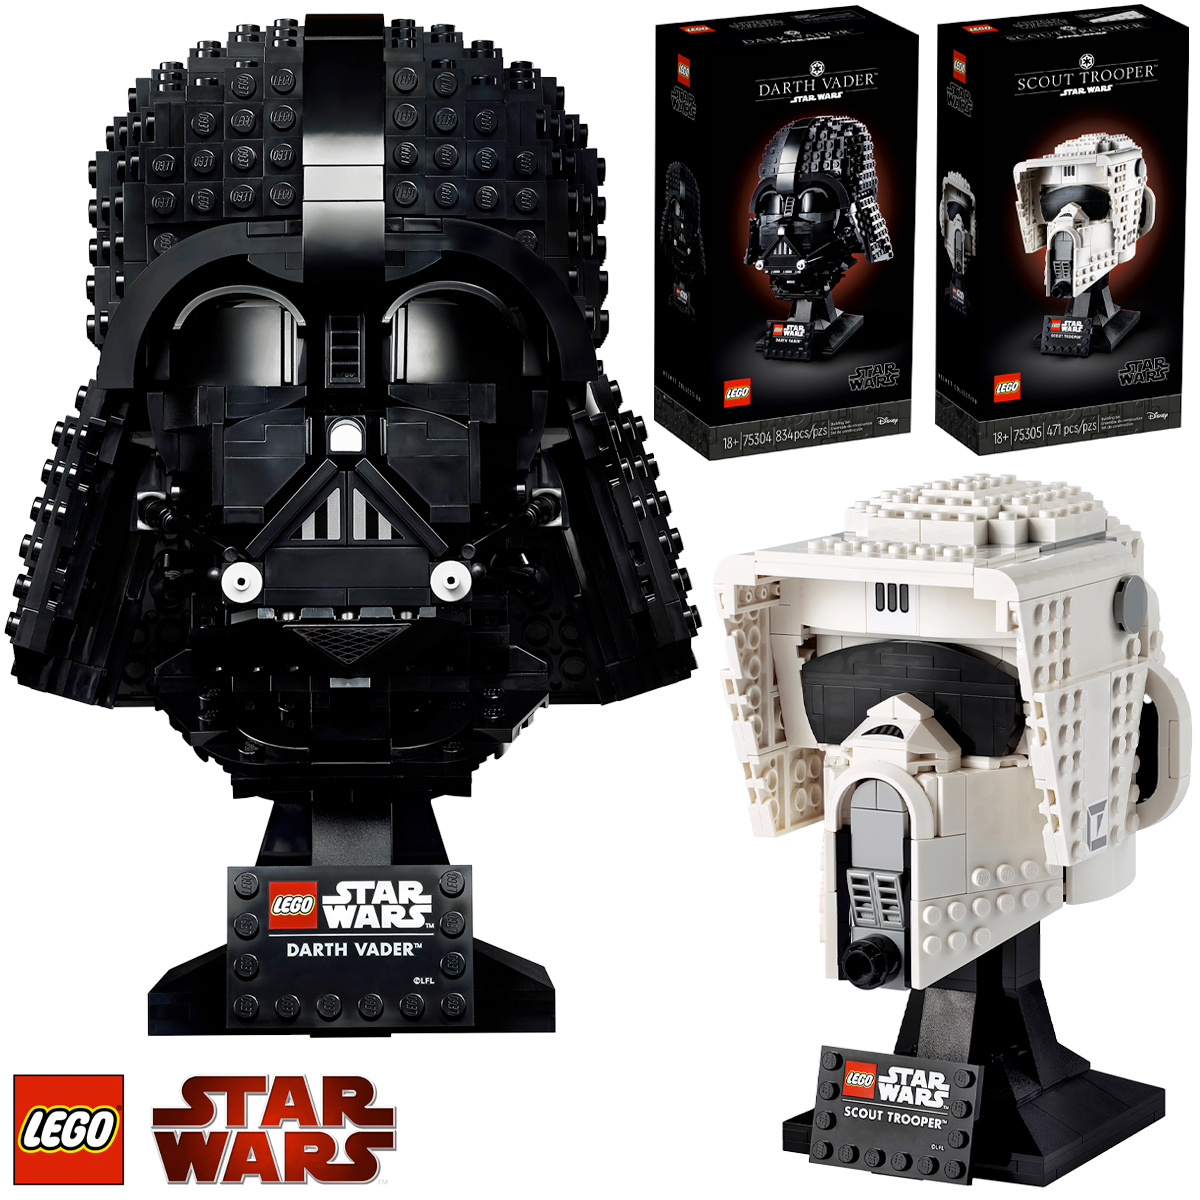 Capacetes LEGO Star Wars Darth Vader e Scout Trooper